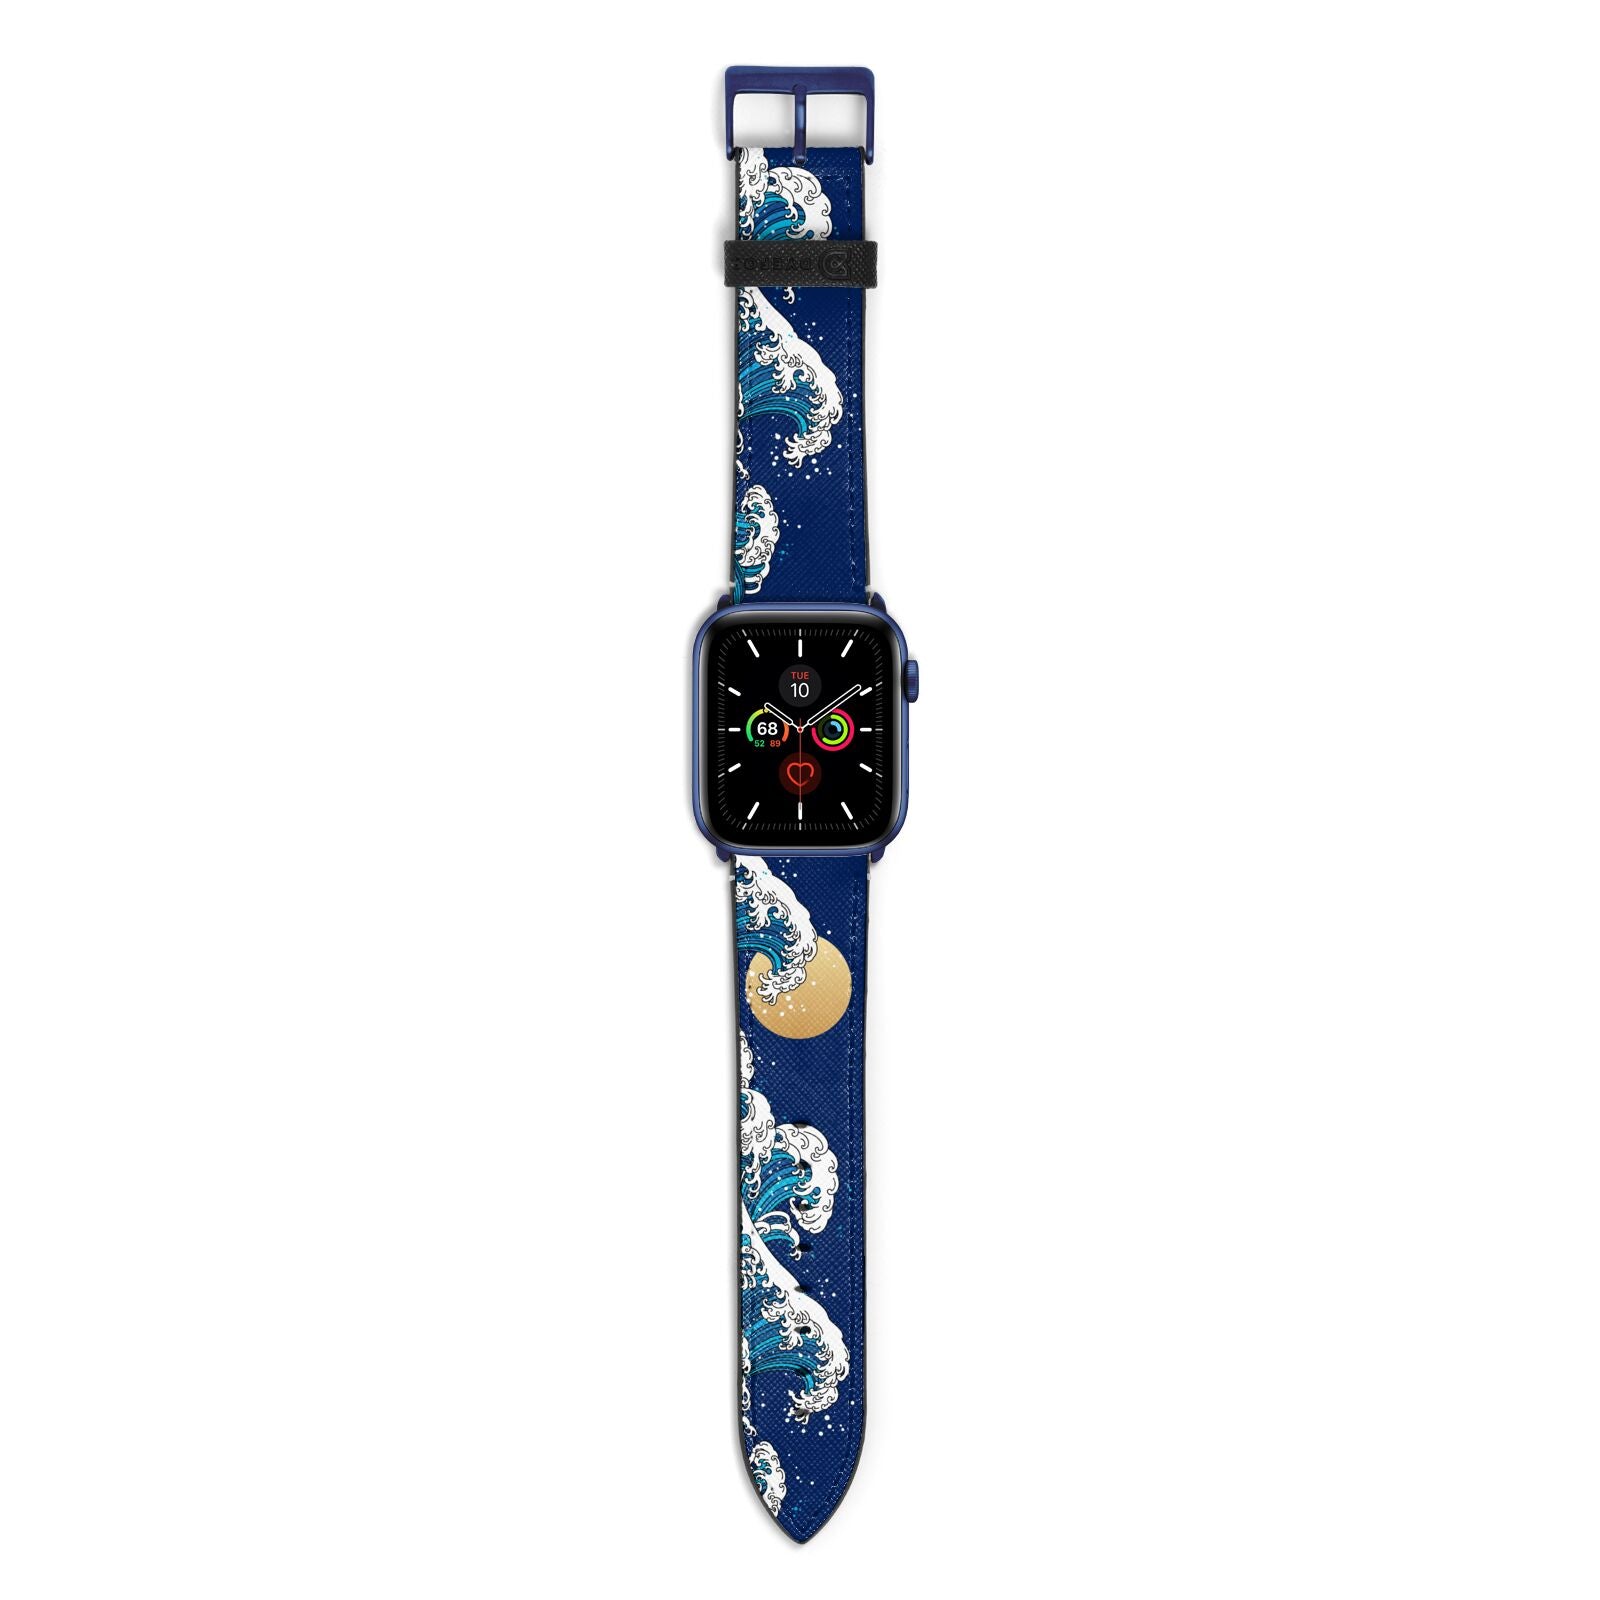 Hokusai Japanese Waves Apple Watch Strap with Blue Hardware